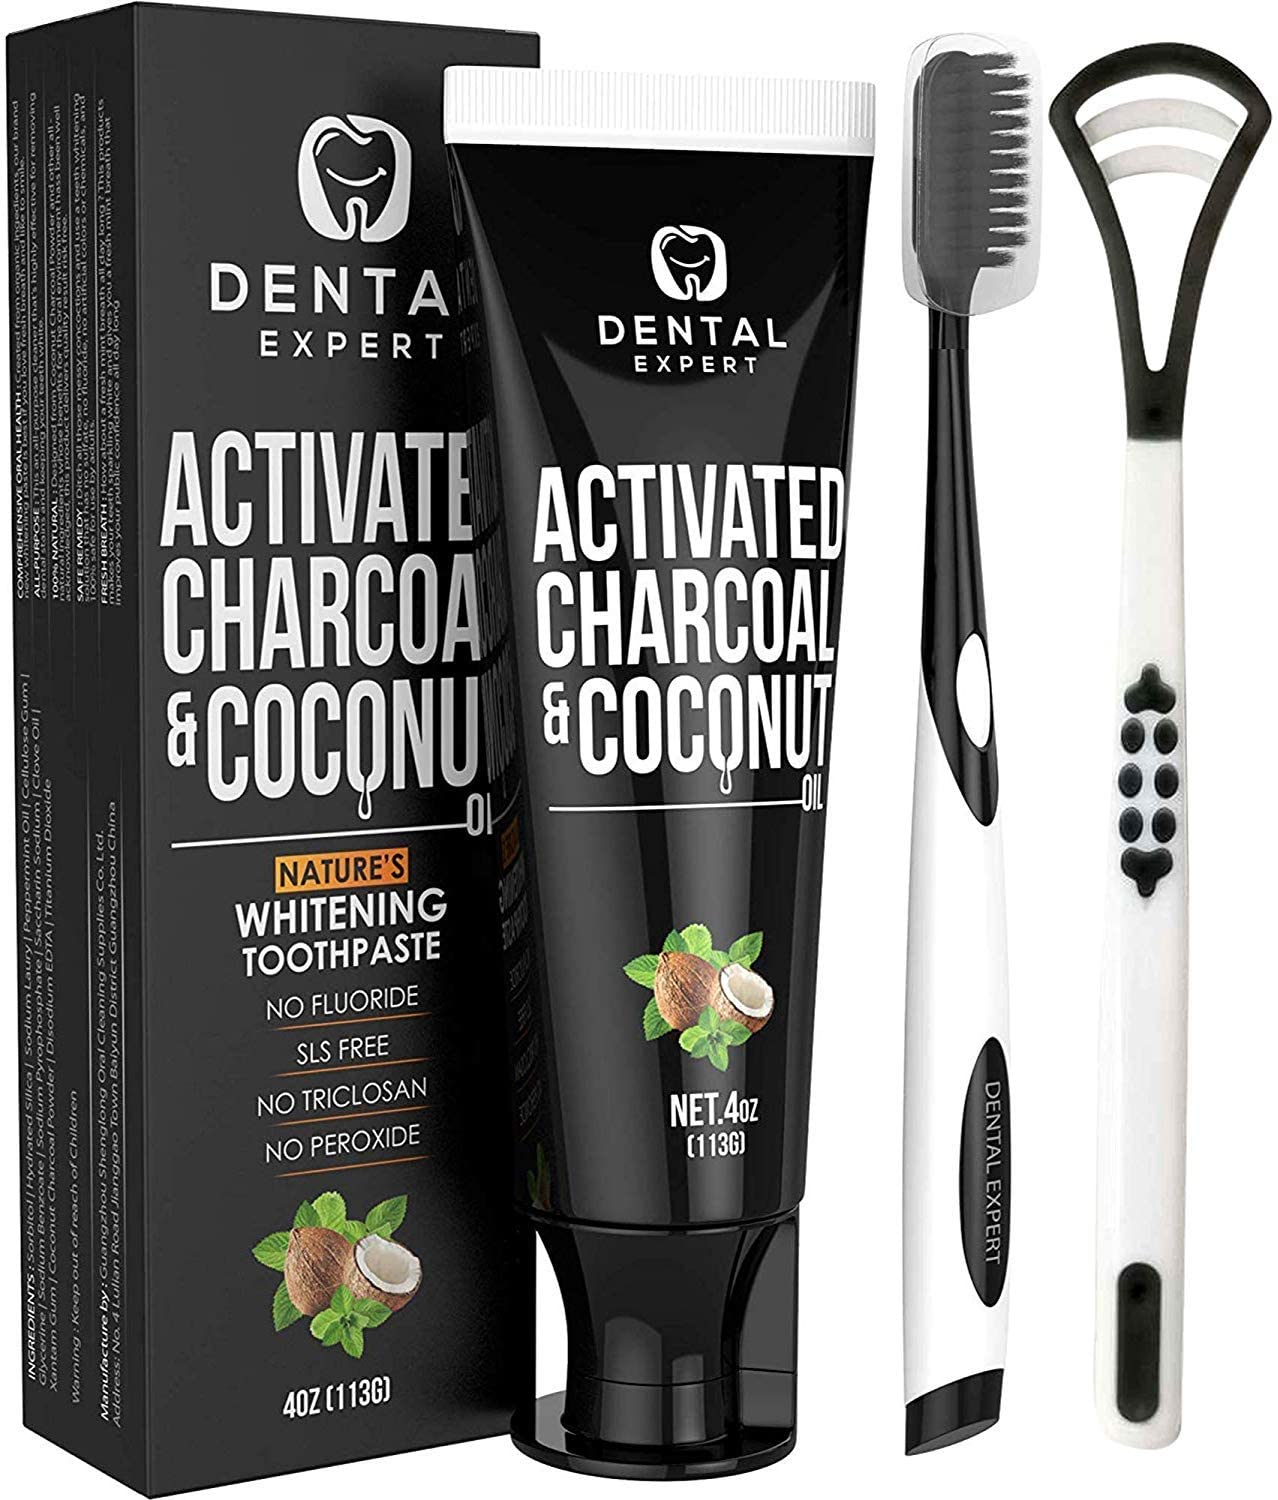 activated charcoal toothpaste as natural teeth whitening aid, does it work